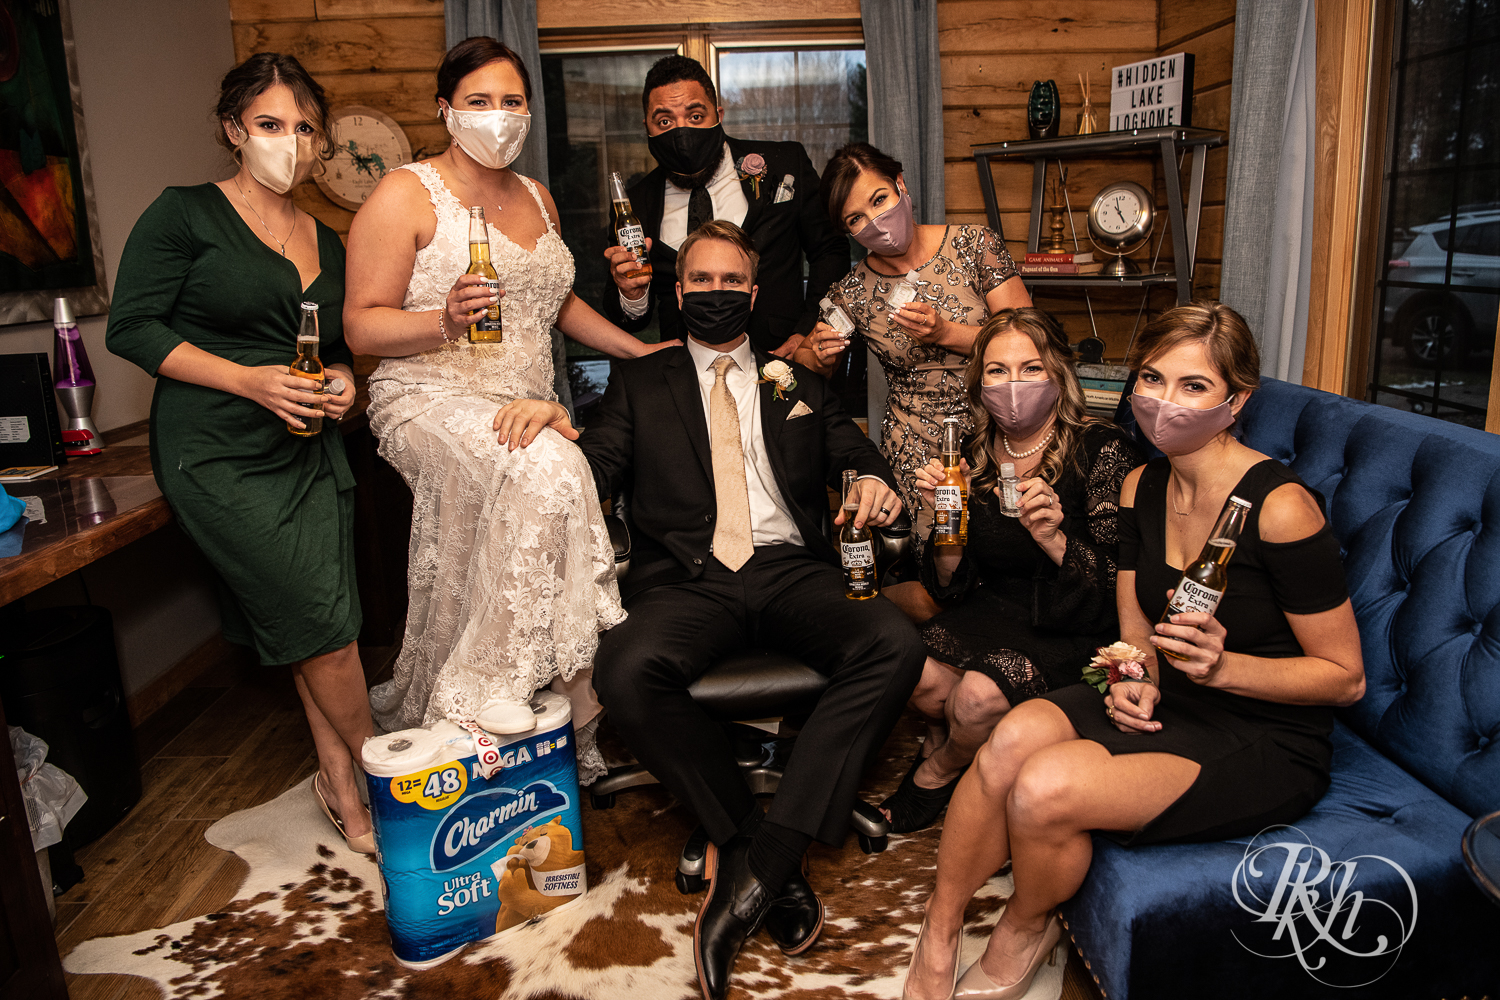 Bride and groom share Coronas and wear masks at 2020 wedding in cabin in Stillwater, Minnesota.